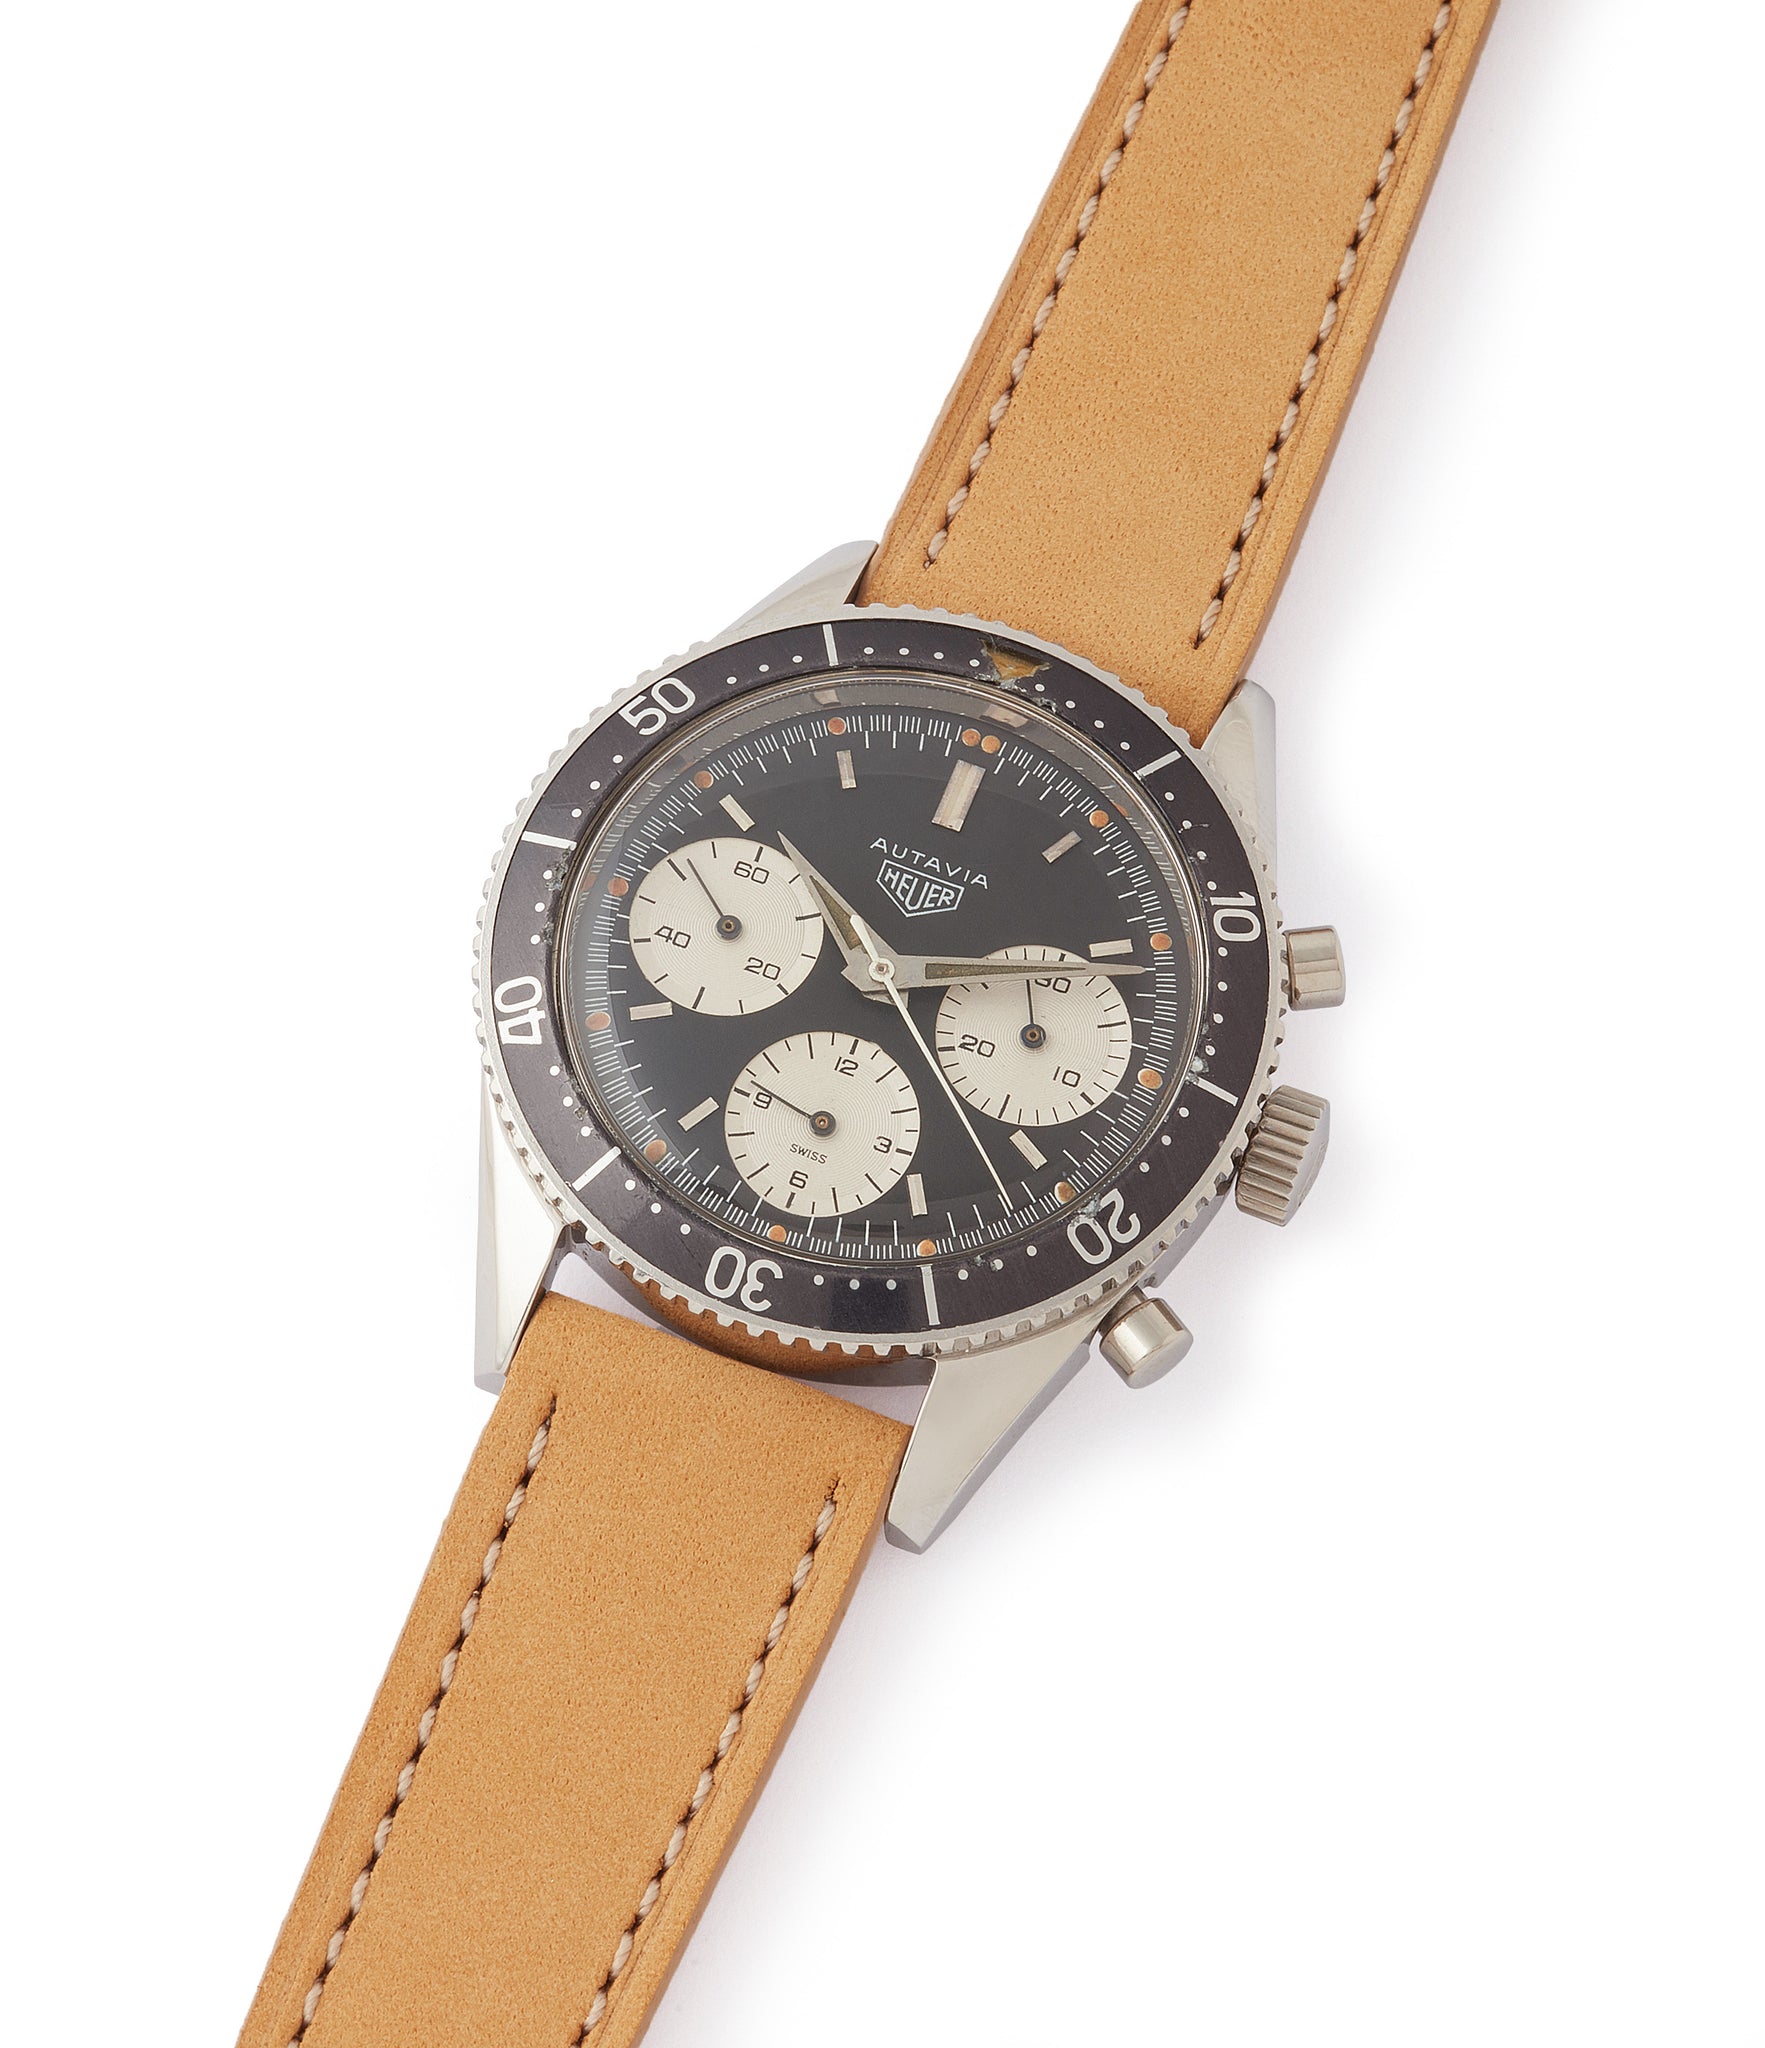 shop vintage Heuer Autavia 2446 Second Execution Valjoux 72 rare first-owner chronograph steel racing sport watch for sale online at A Collected Man London UK rare watch specilaist